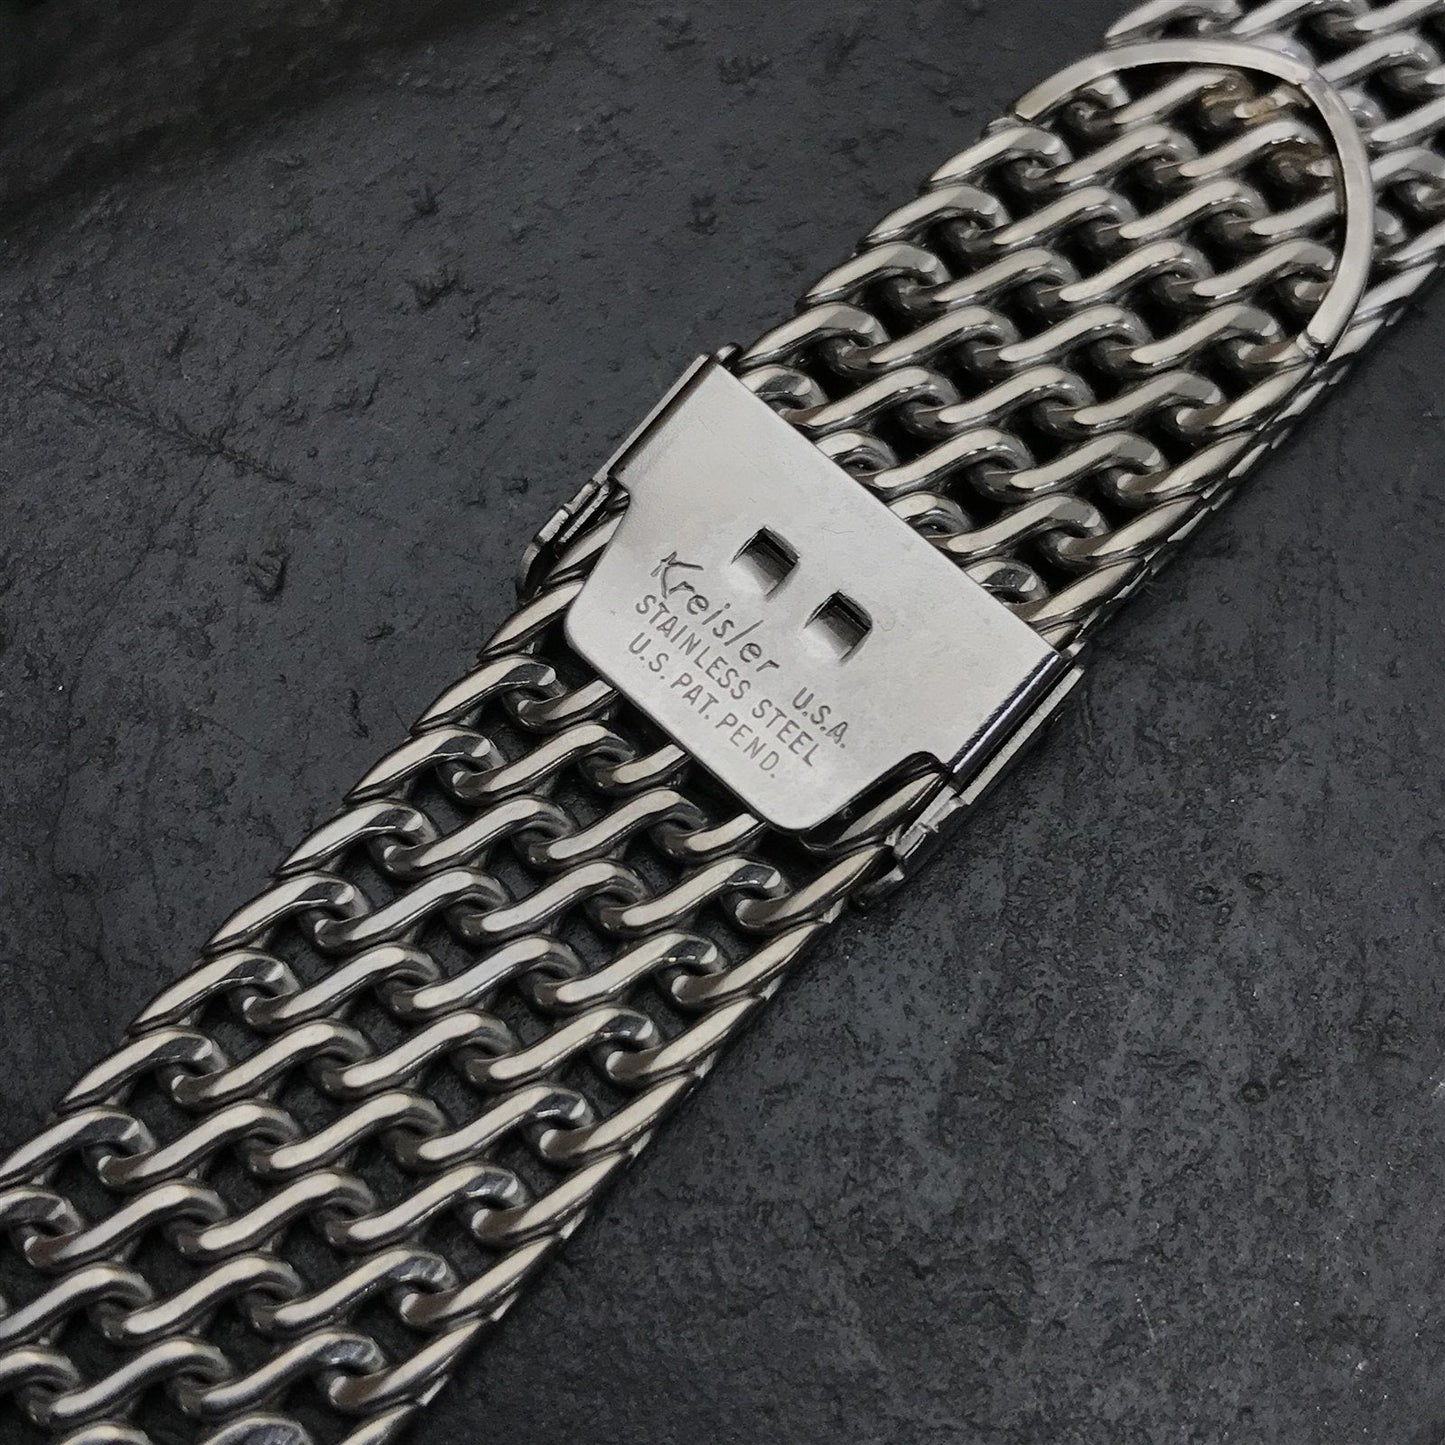 17.2mm Stainless Steel Thick Mesh Kreisler USA 1960s Vintage Watch Band